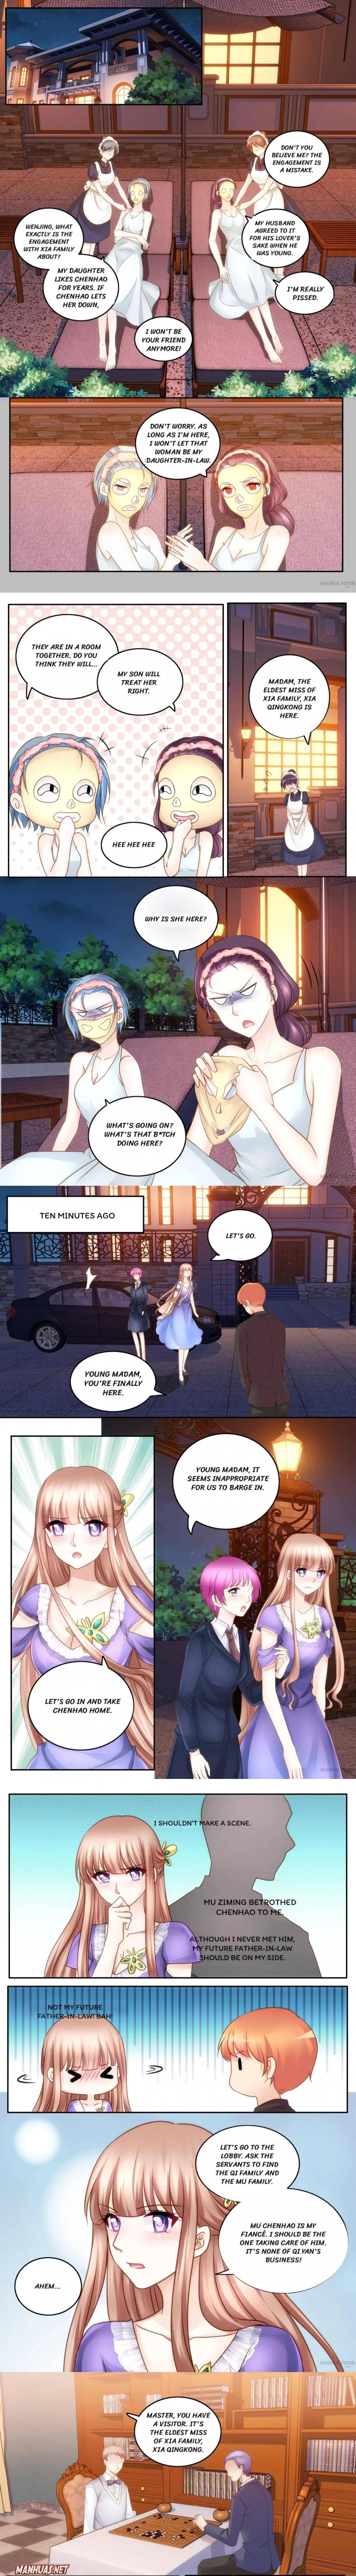 Vengeful Girl With Her Ceo - Page 1